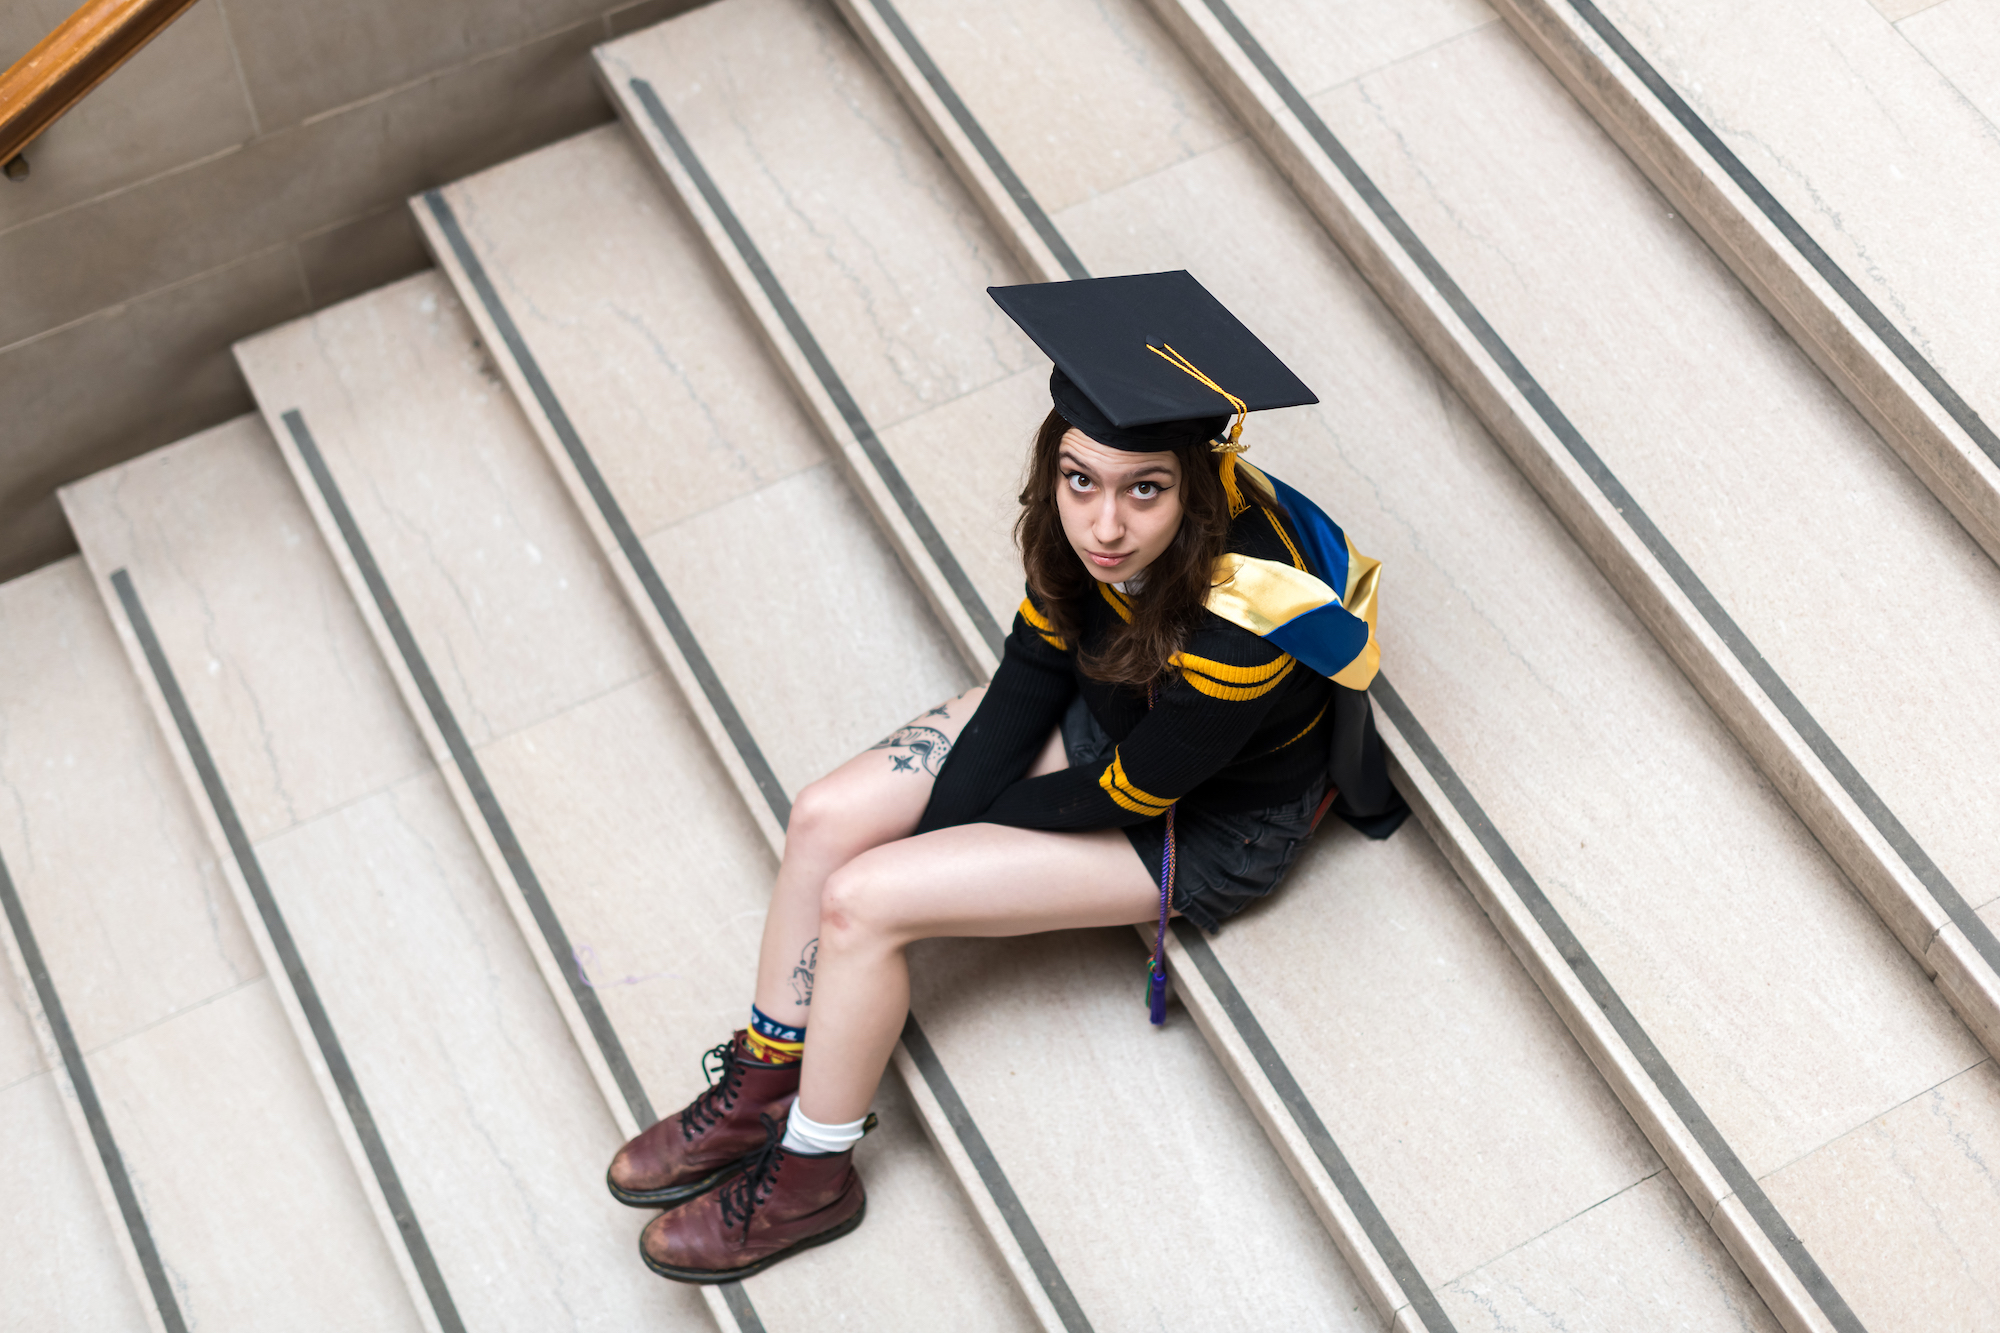 A student in graduation regalia sits on steps looking up at the camera